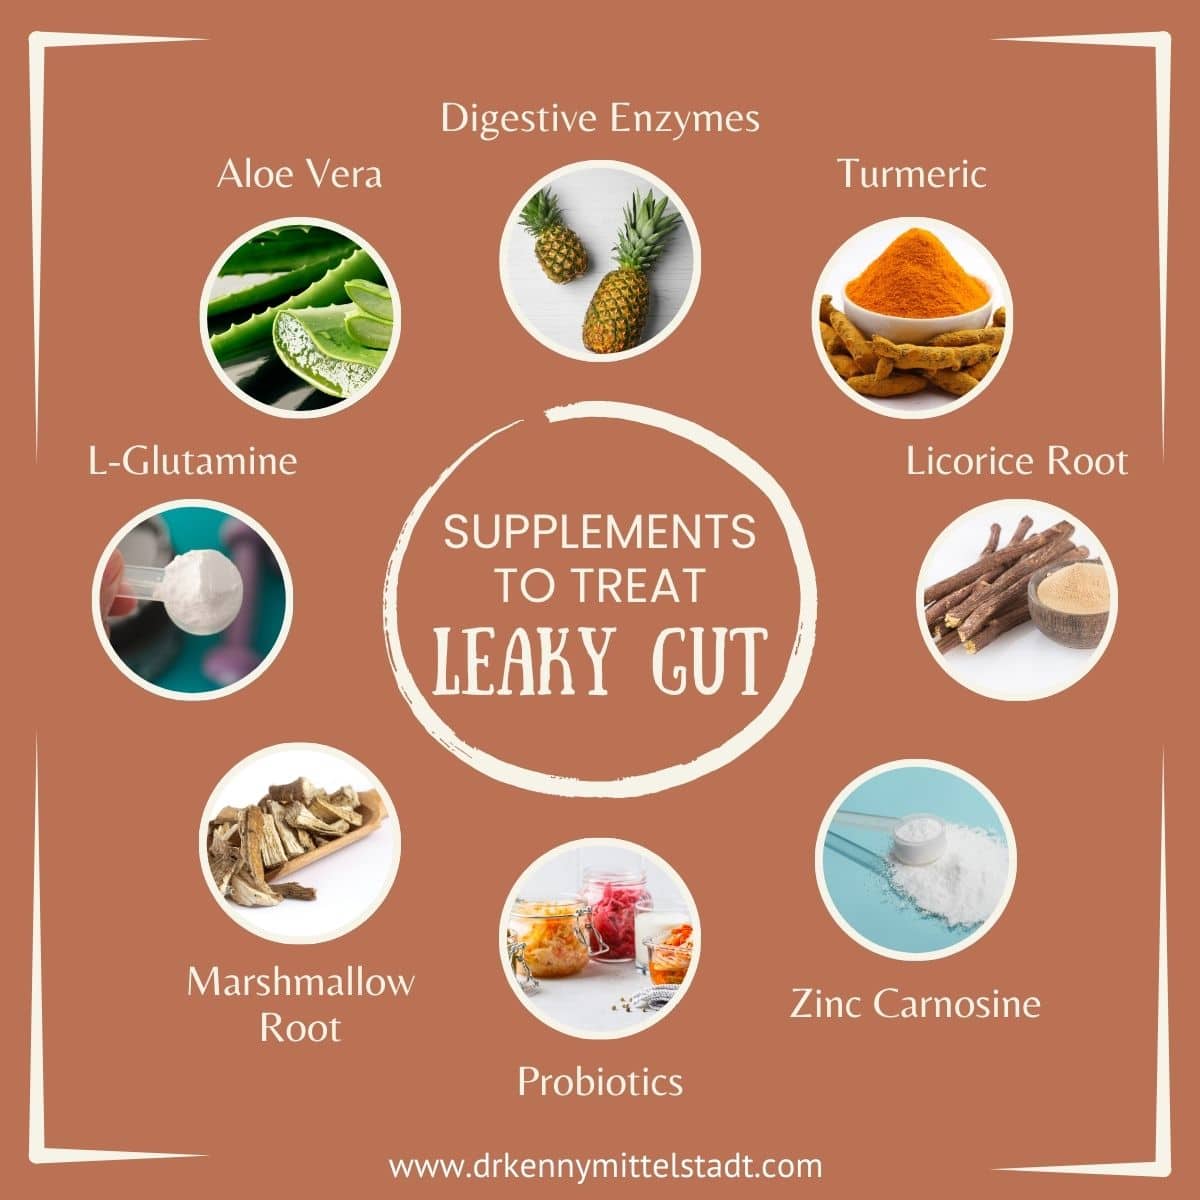 This graphic lists supplements that can be used to treat leaky gut as discussed in the full blog post.